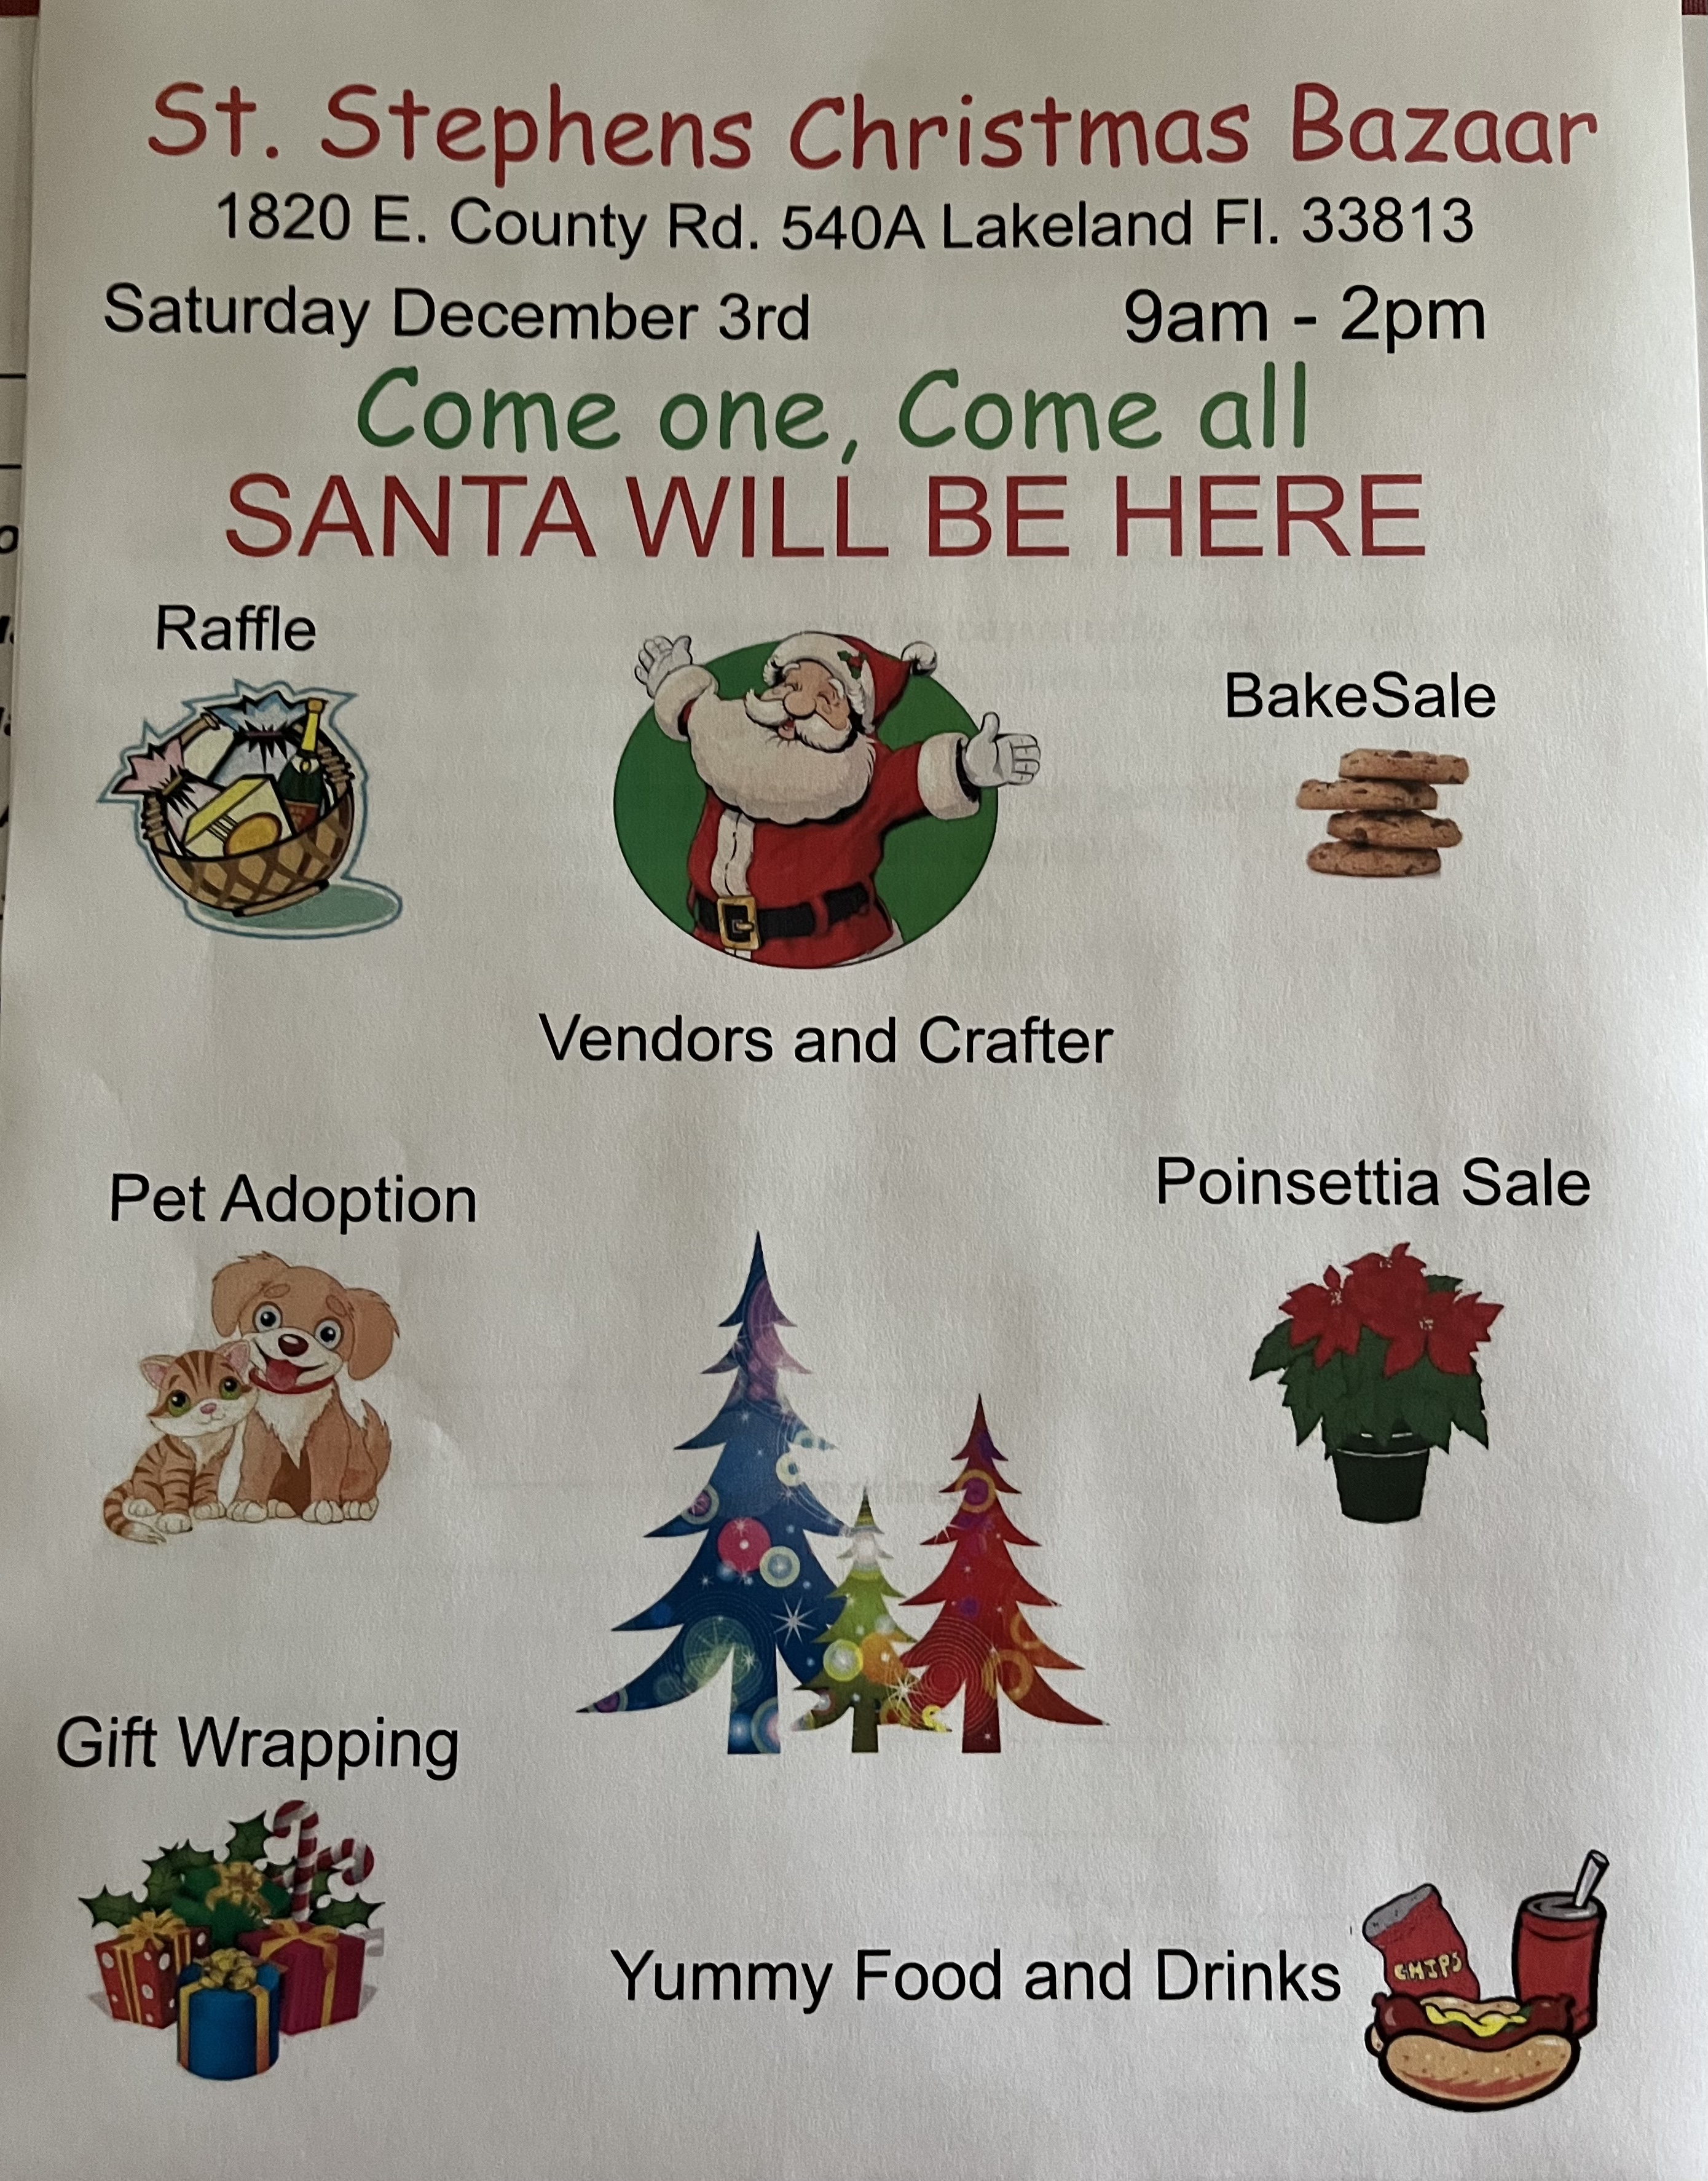 Christmas Bazaar with a bake sale, poinsettias sale, and SANTA for all the kids ( free) vendors and crafter, animals for adoption, food and lots more. All proceeds go to ministry and out reach.